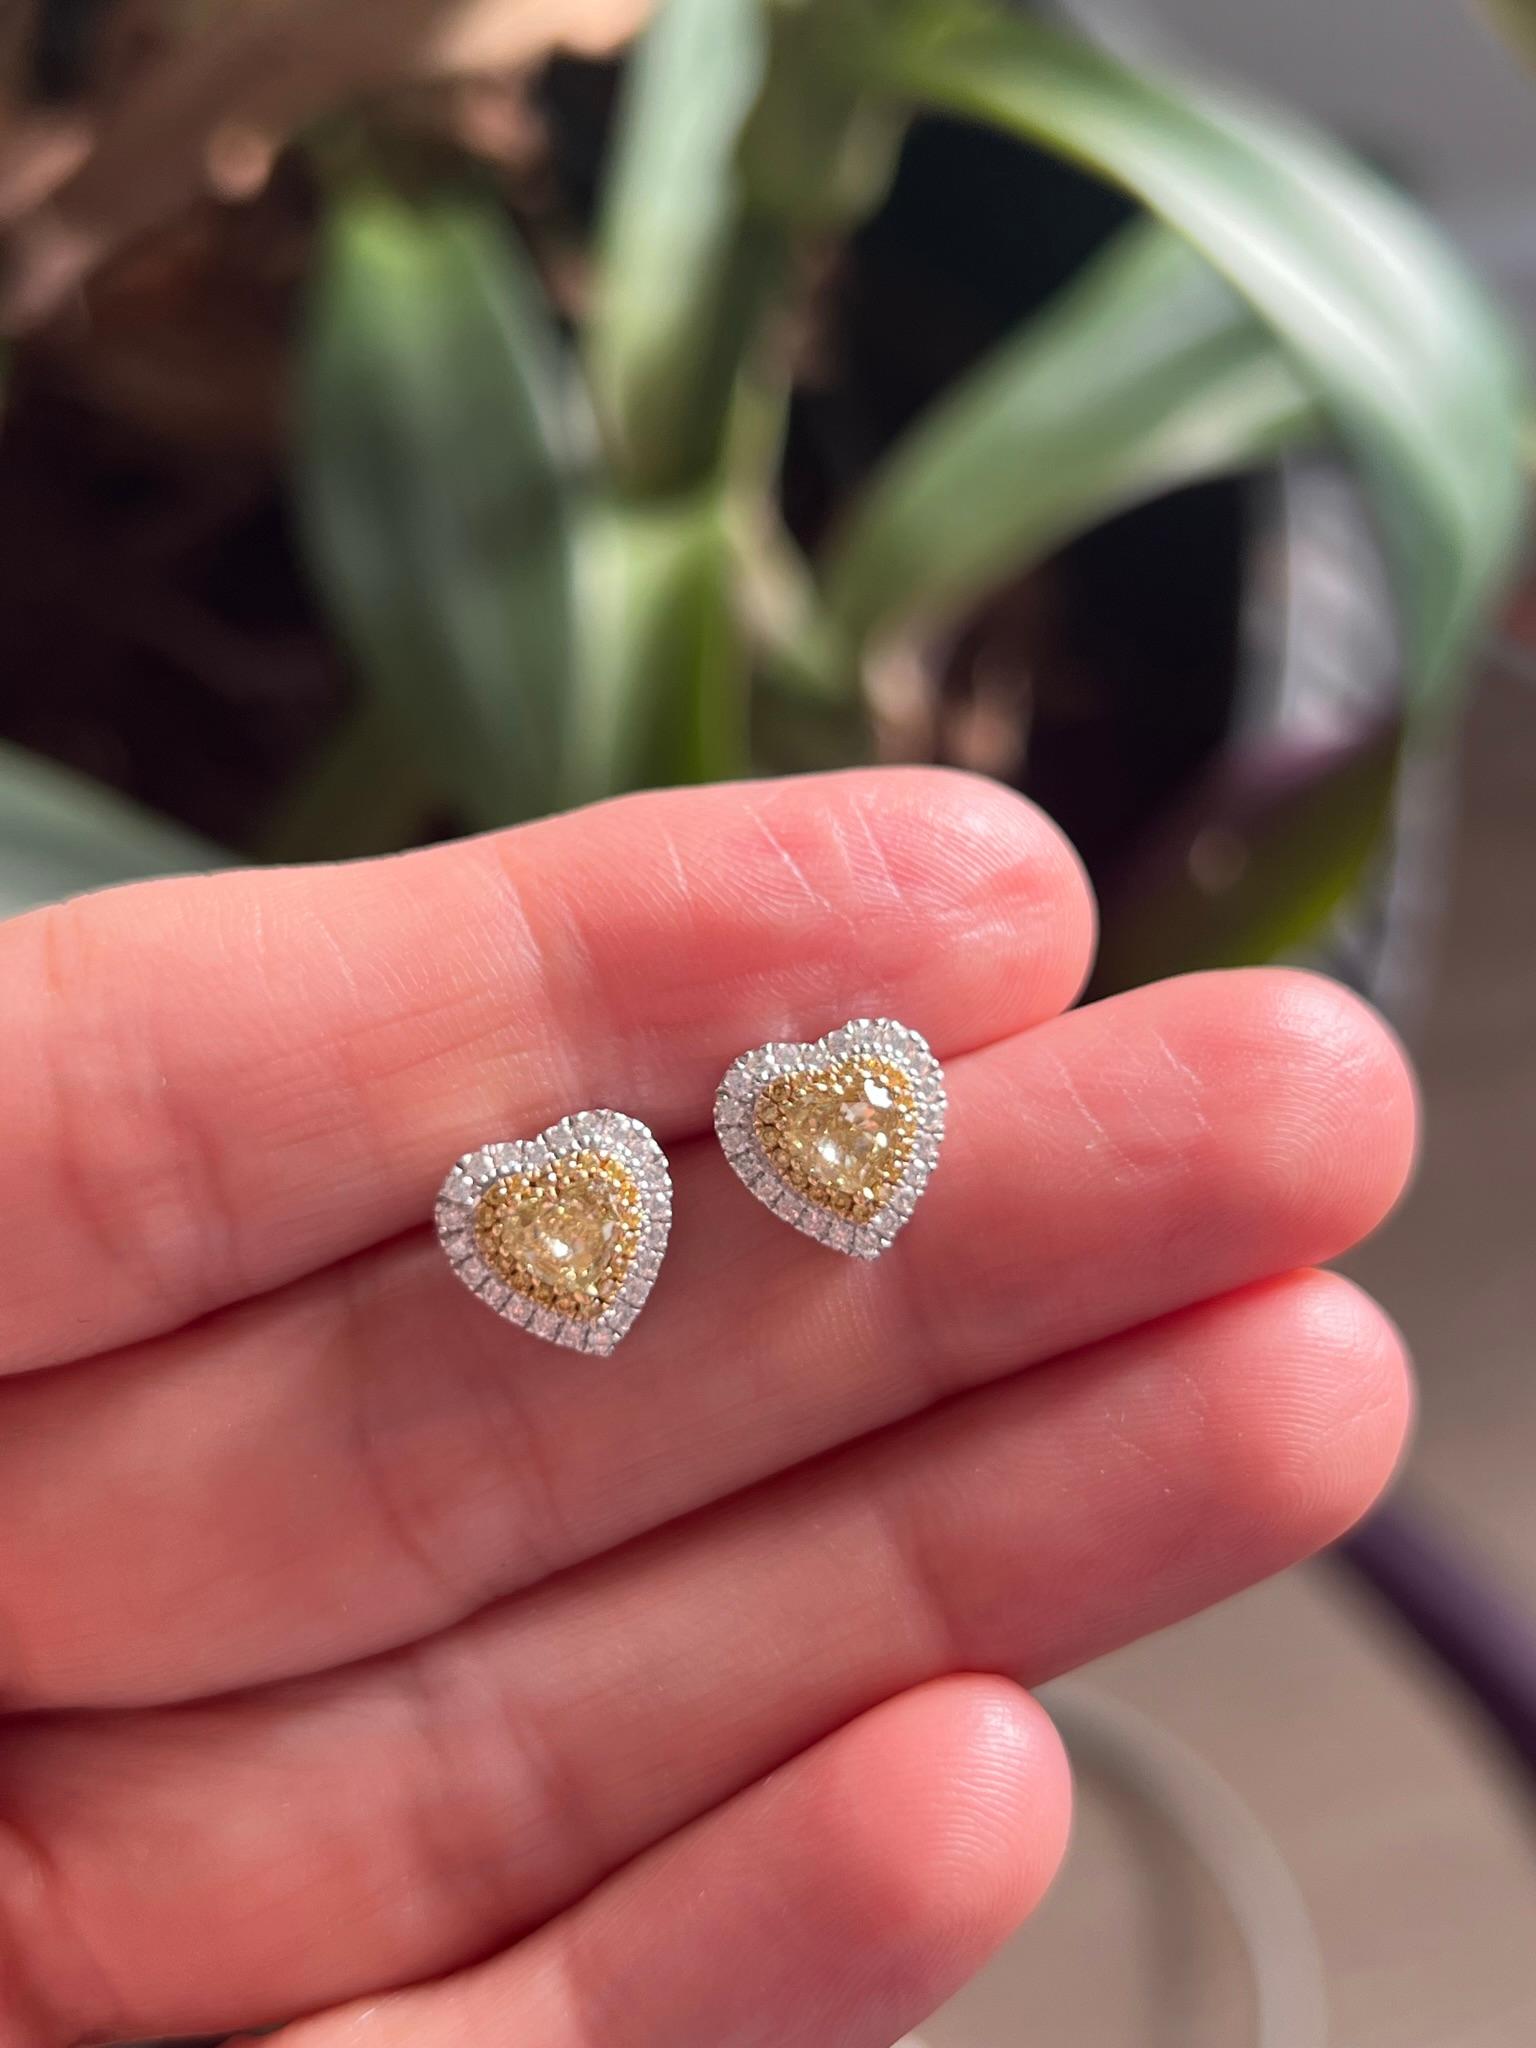 18K white and yellow gold fancy yellow diamond earrings with a double diamond halo.

Features
18K white and yellow gold
1.25 carat total weight fancy yellow heart shape diamonds
.40 carat combined total weight for the smaller white and yellow